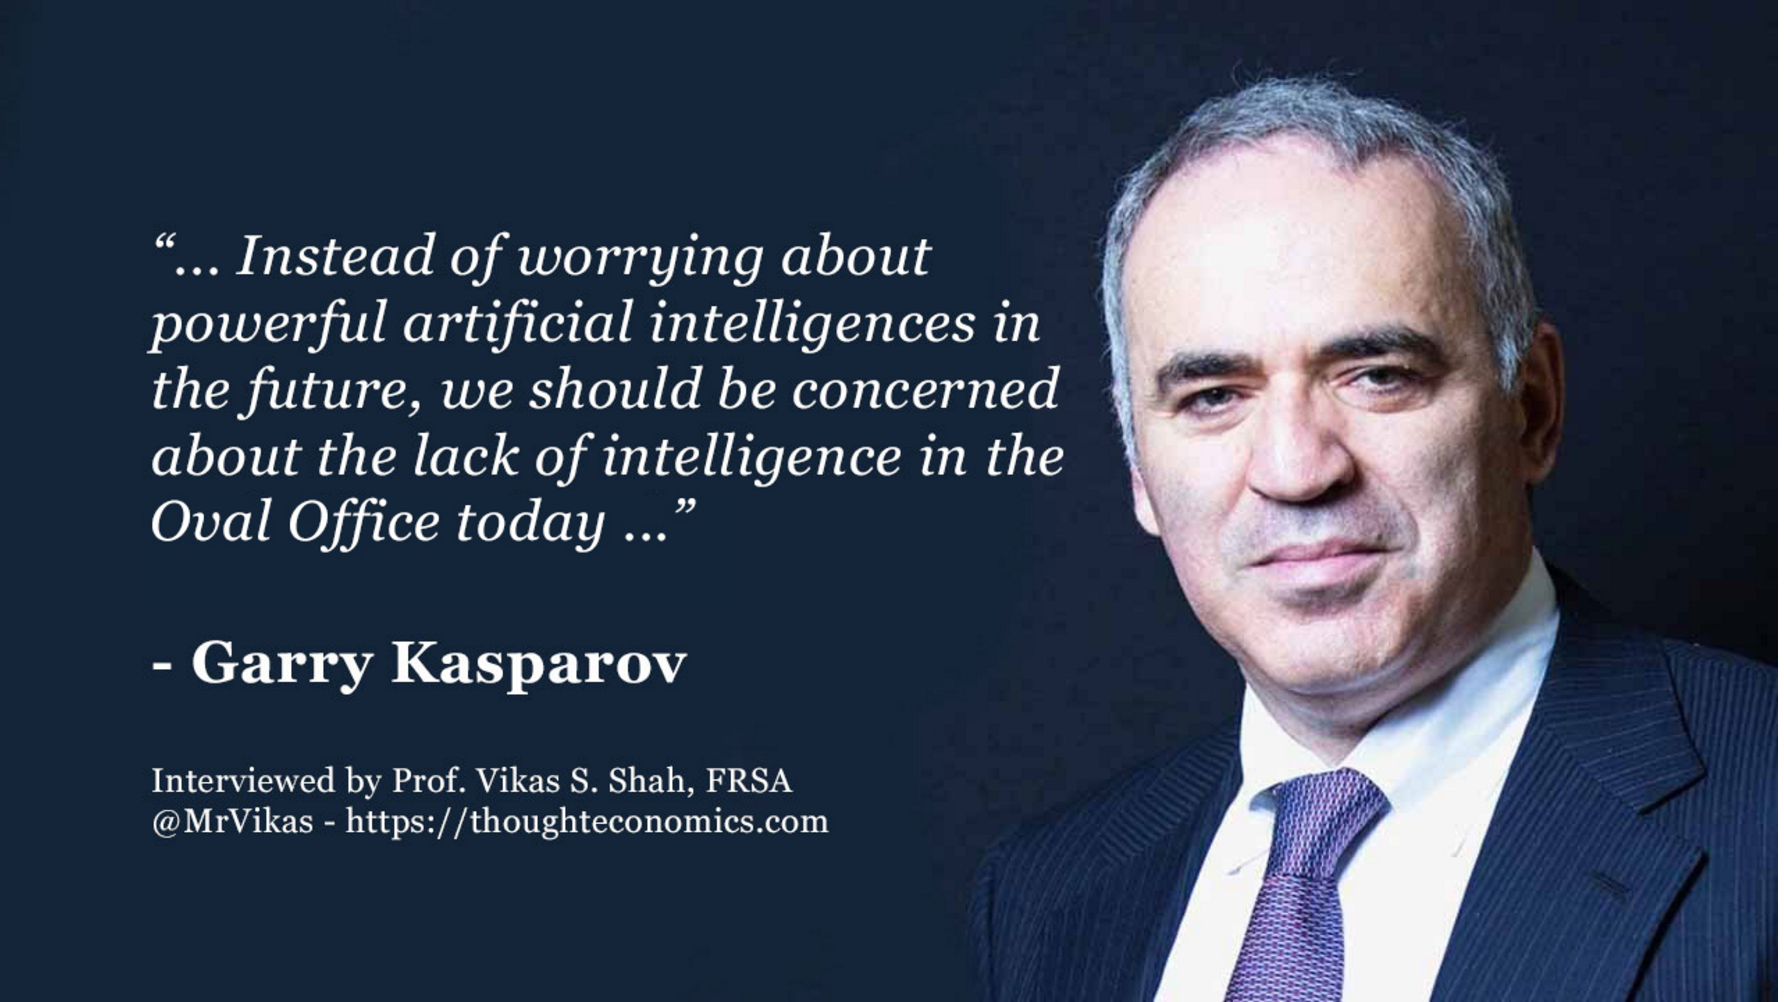 Kasparov 'Survives' While 4 Others Surge To Top 